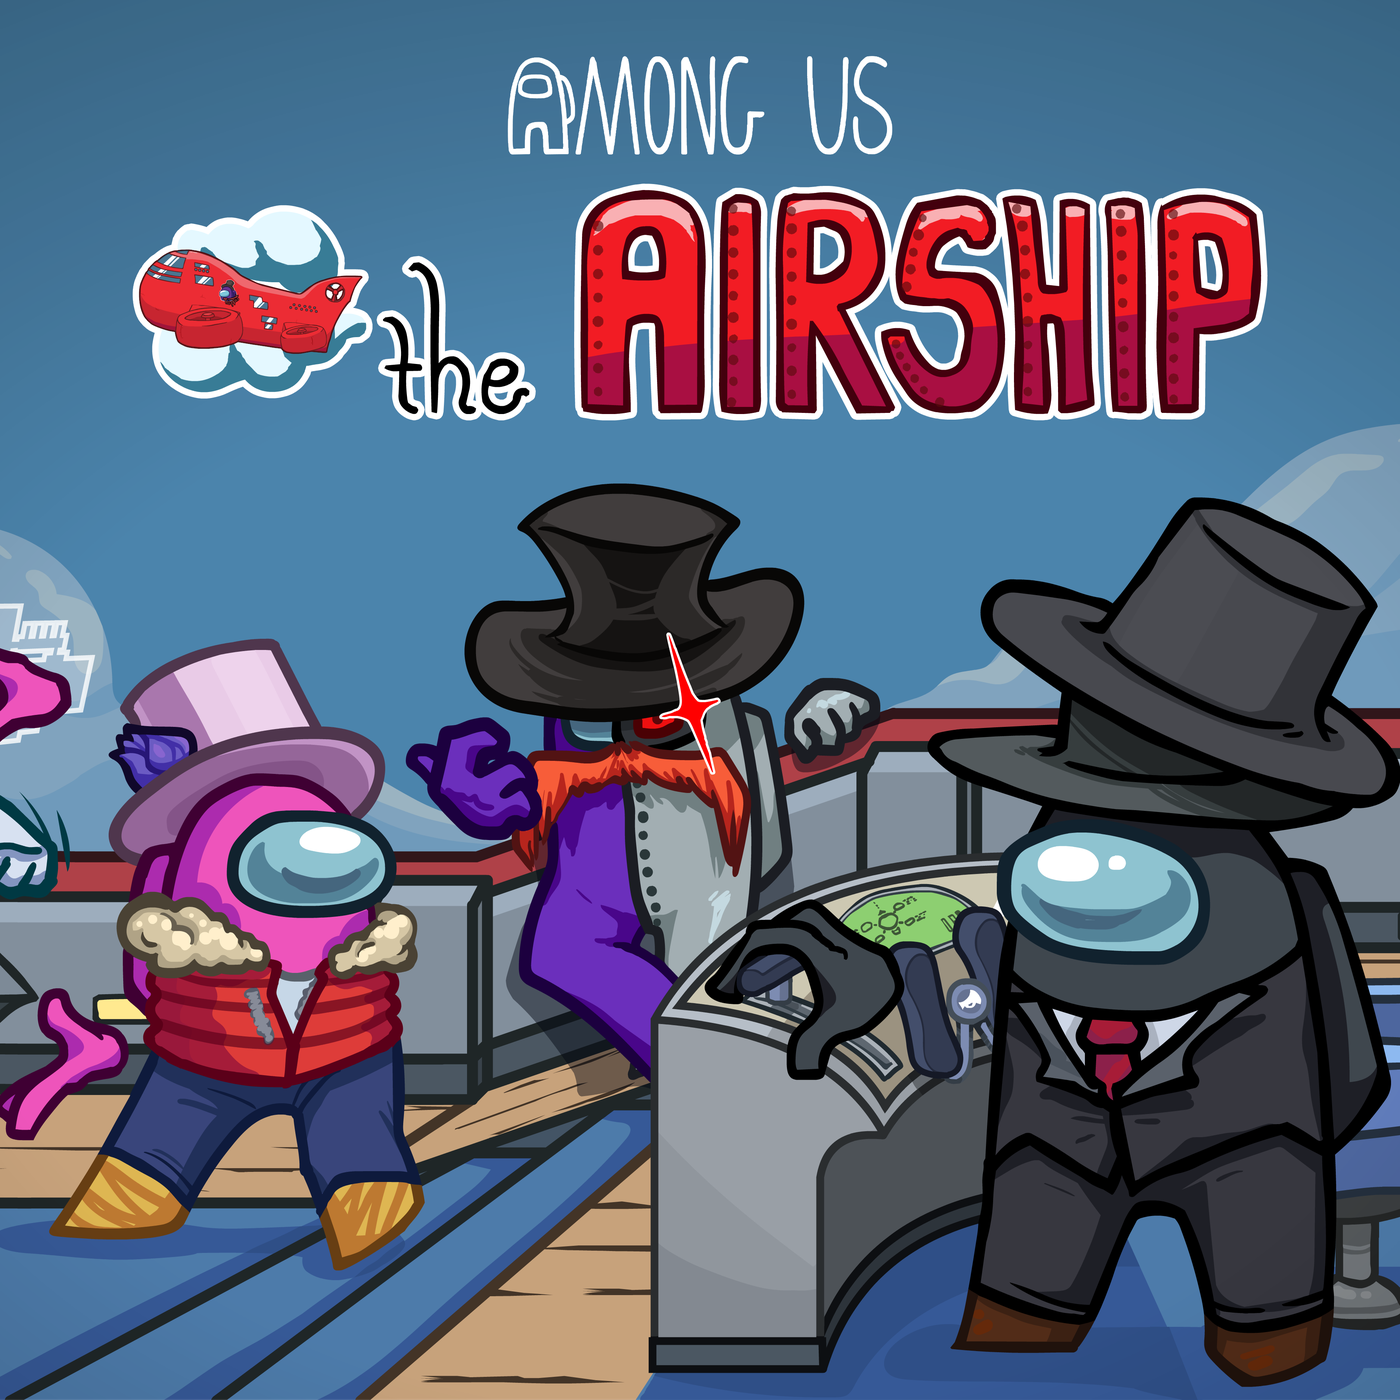 Among Us' new Airship map launches on March 31st